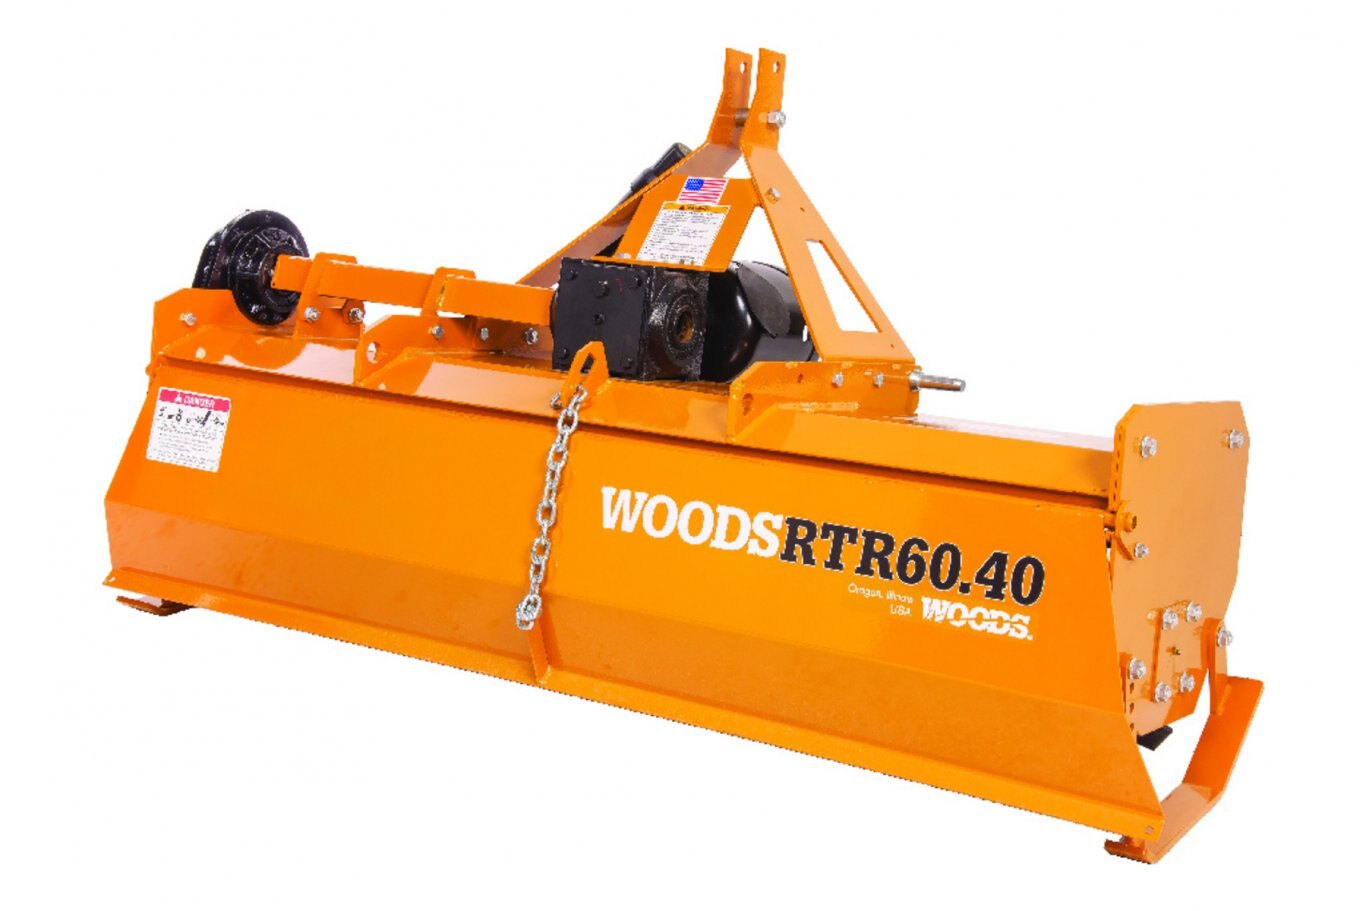 Woods Rotary Tillers RTR60.40